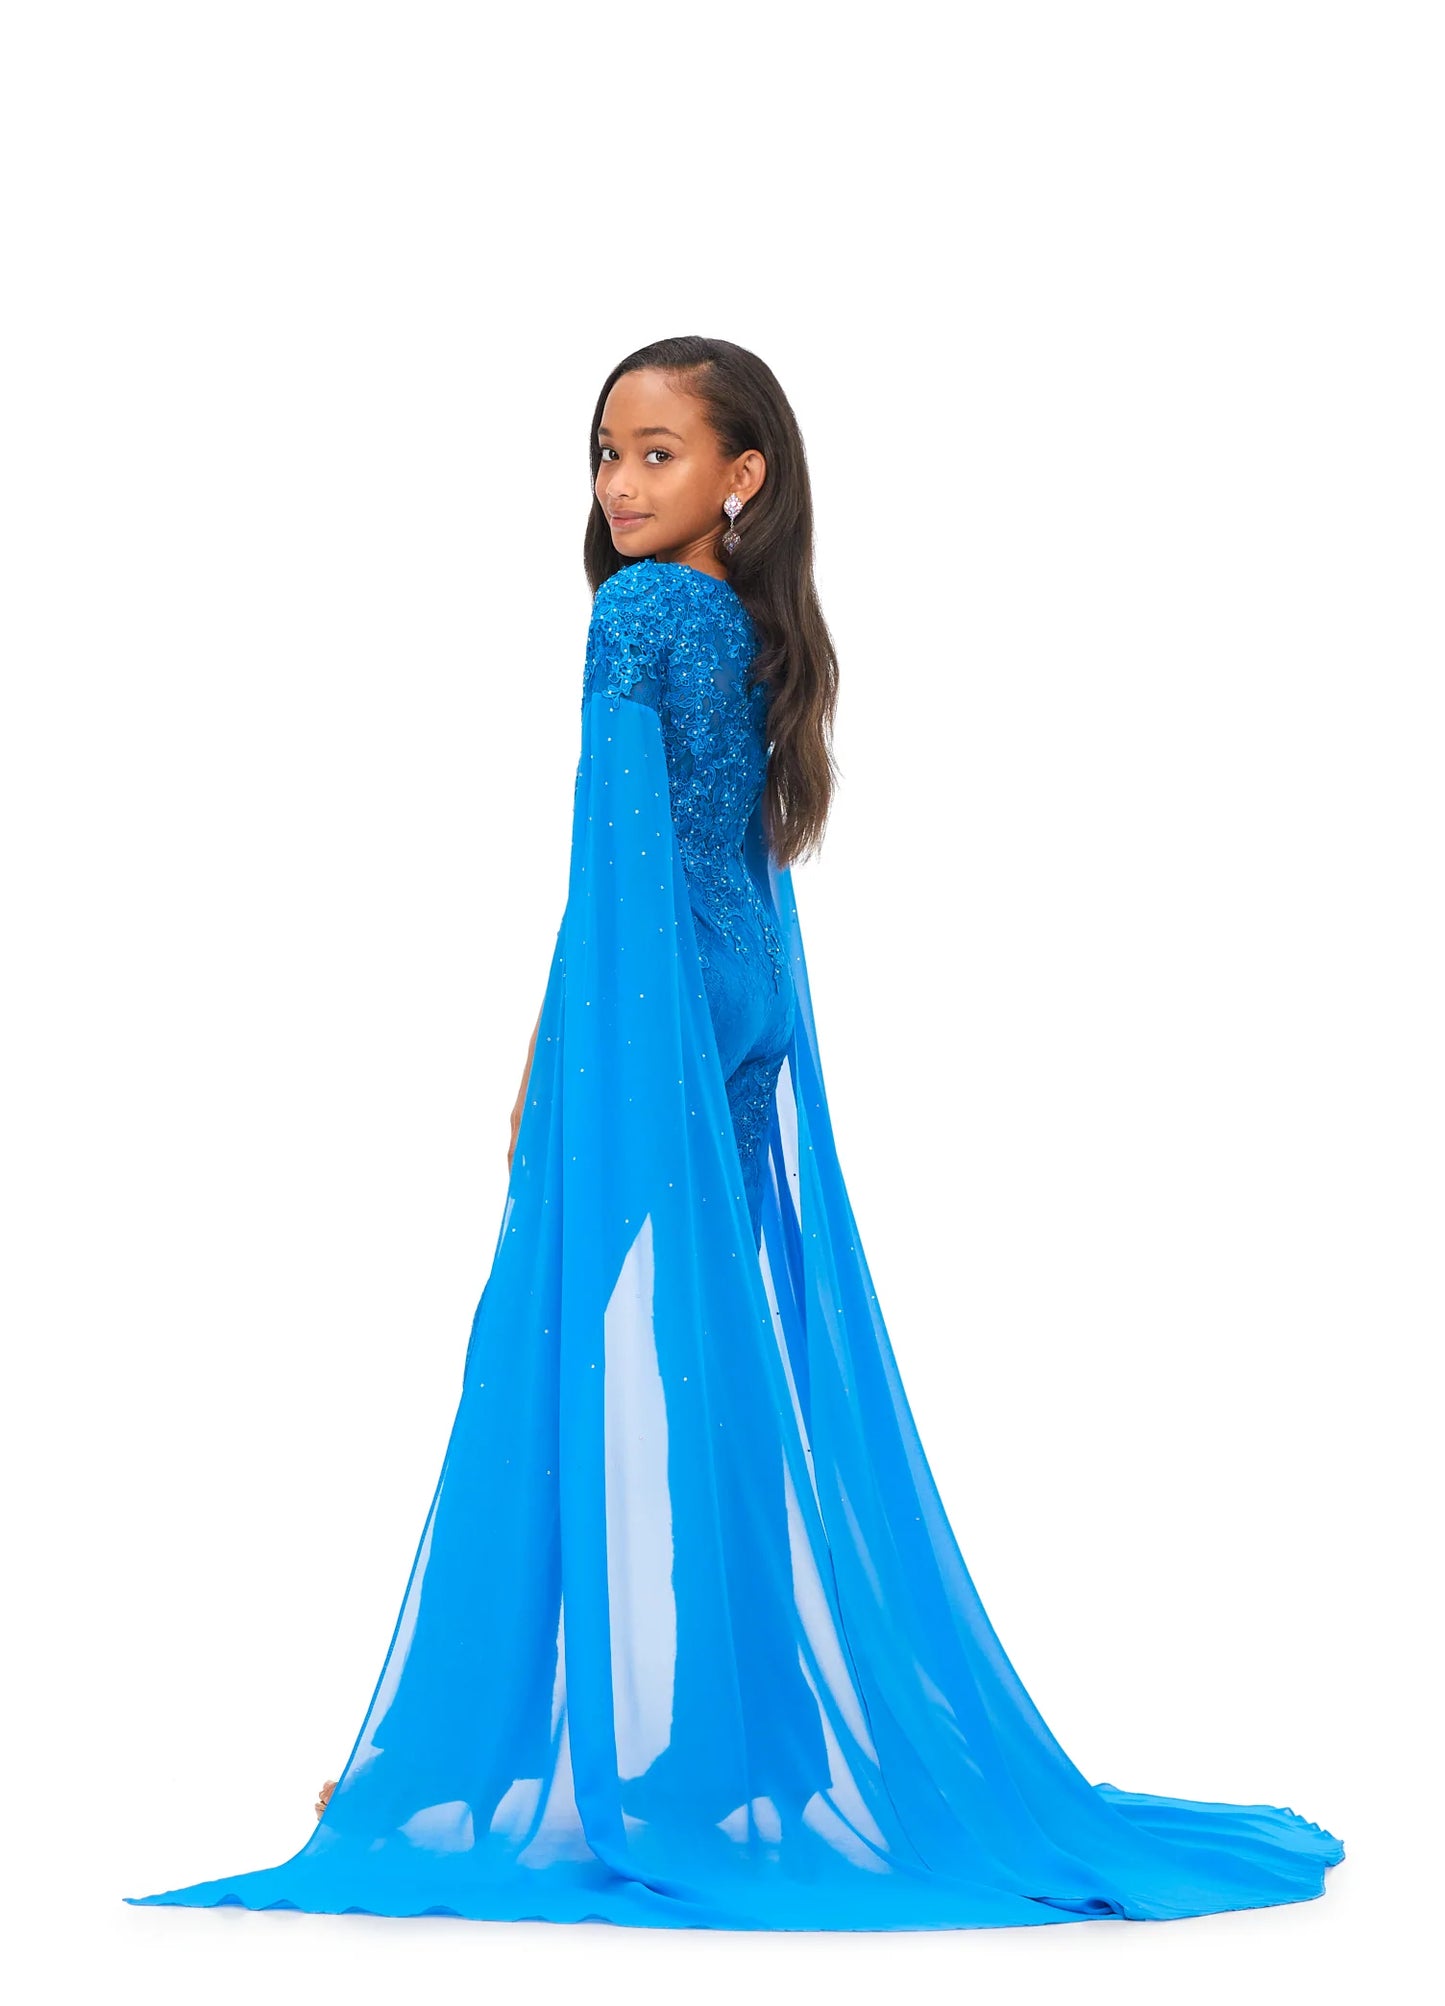 Ashley Lauren Kids 8162 Lace Girls Cape Sleeve Jumpsuit Formal Fun Fashion V Neck Chiffon This jumpsuit is bringing all the drama. It features a v-neckline, lace embroidery and dramatic cape sleeves perfect for your next fun fashion or runway. V-Neckline Embroidery Cape Sleeves Jumpsuit